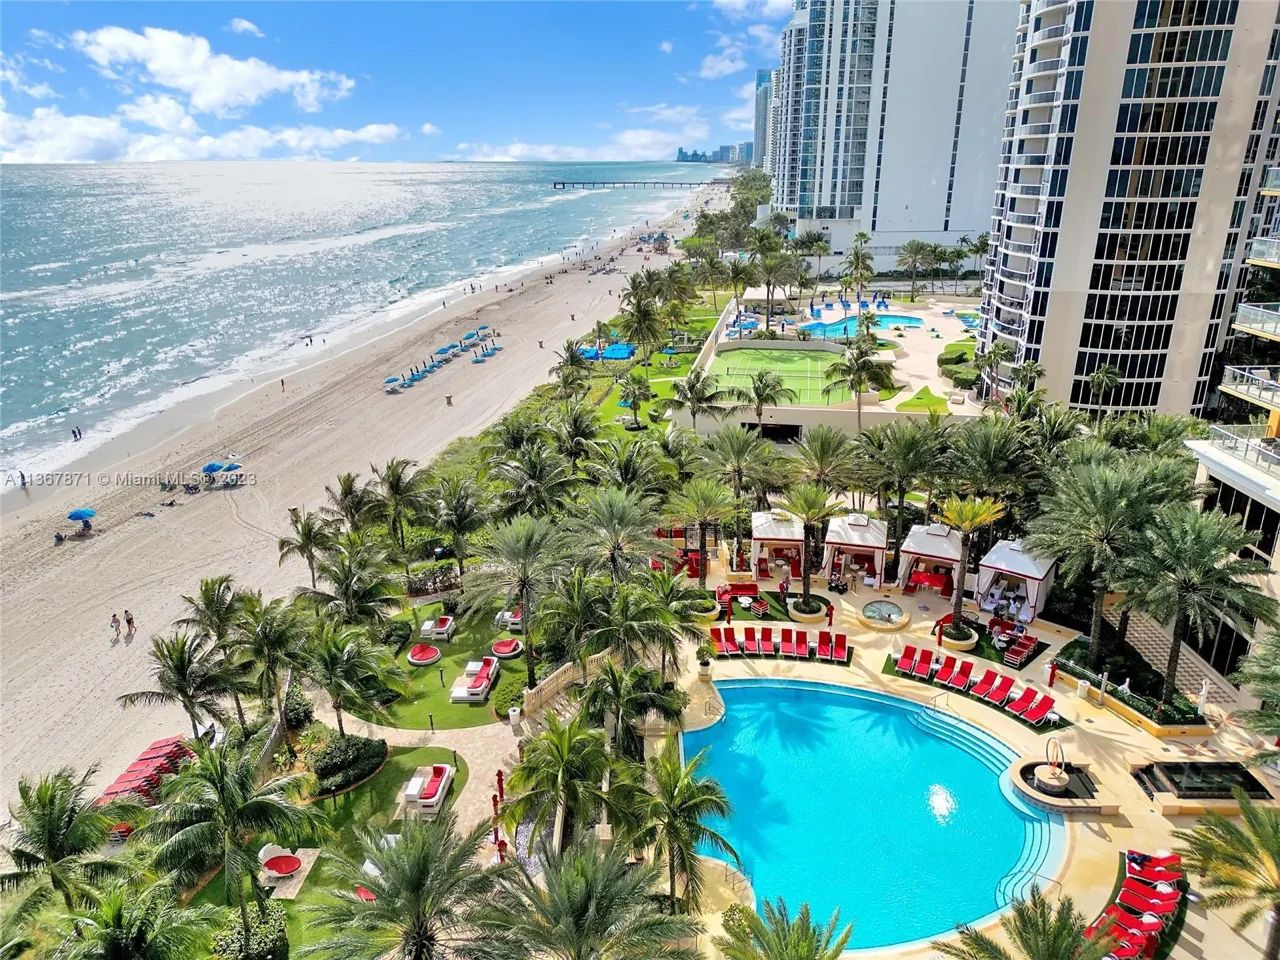 An Aerial View of a Beach Resort at The Mansions at Acqualina